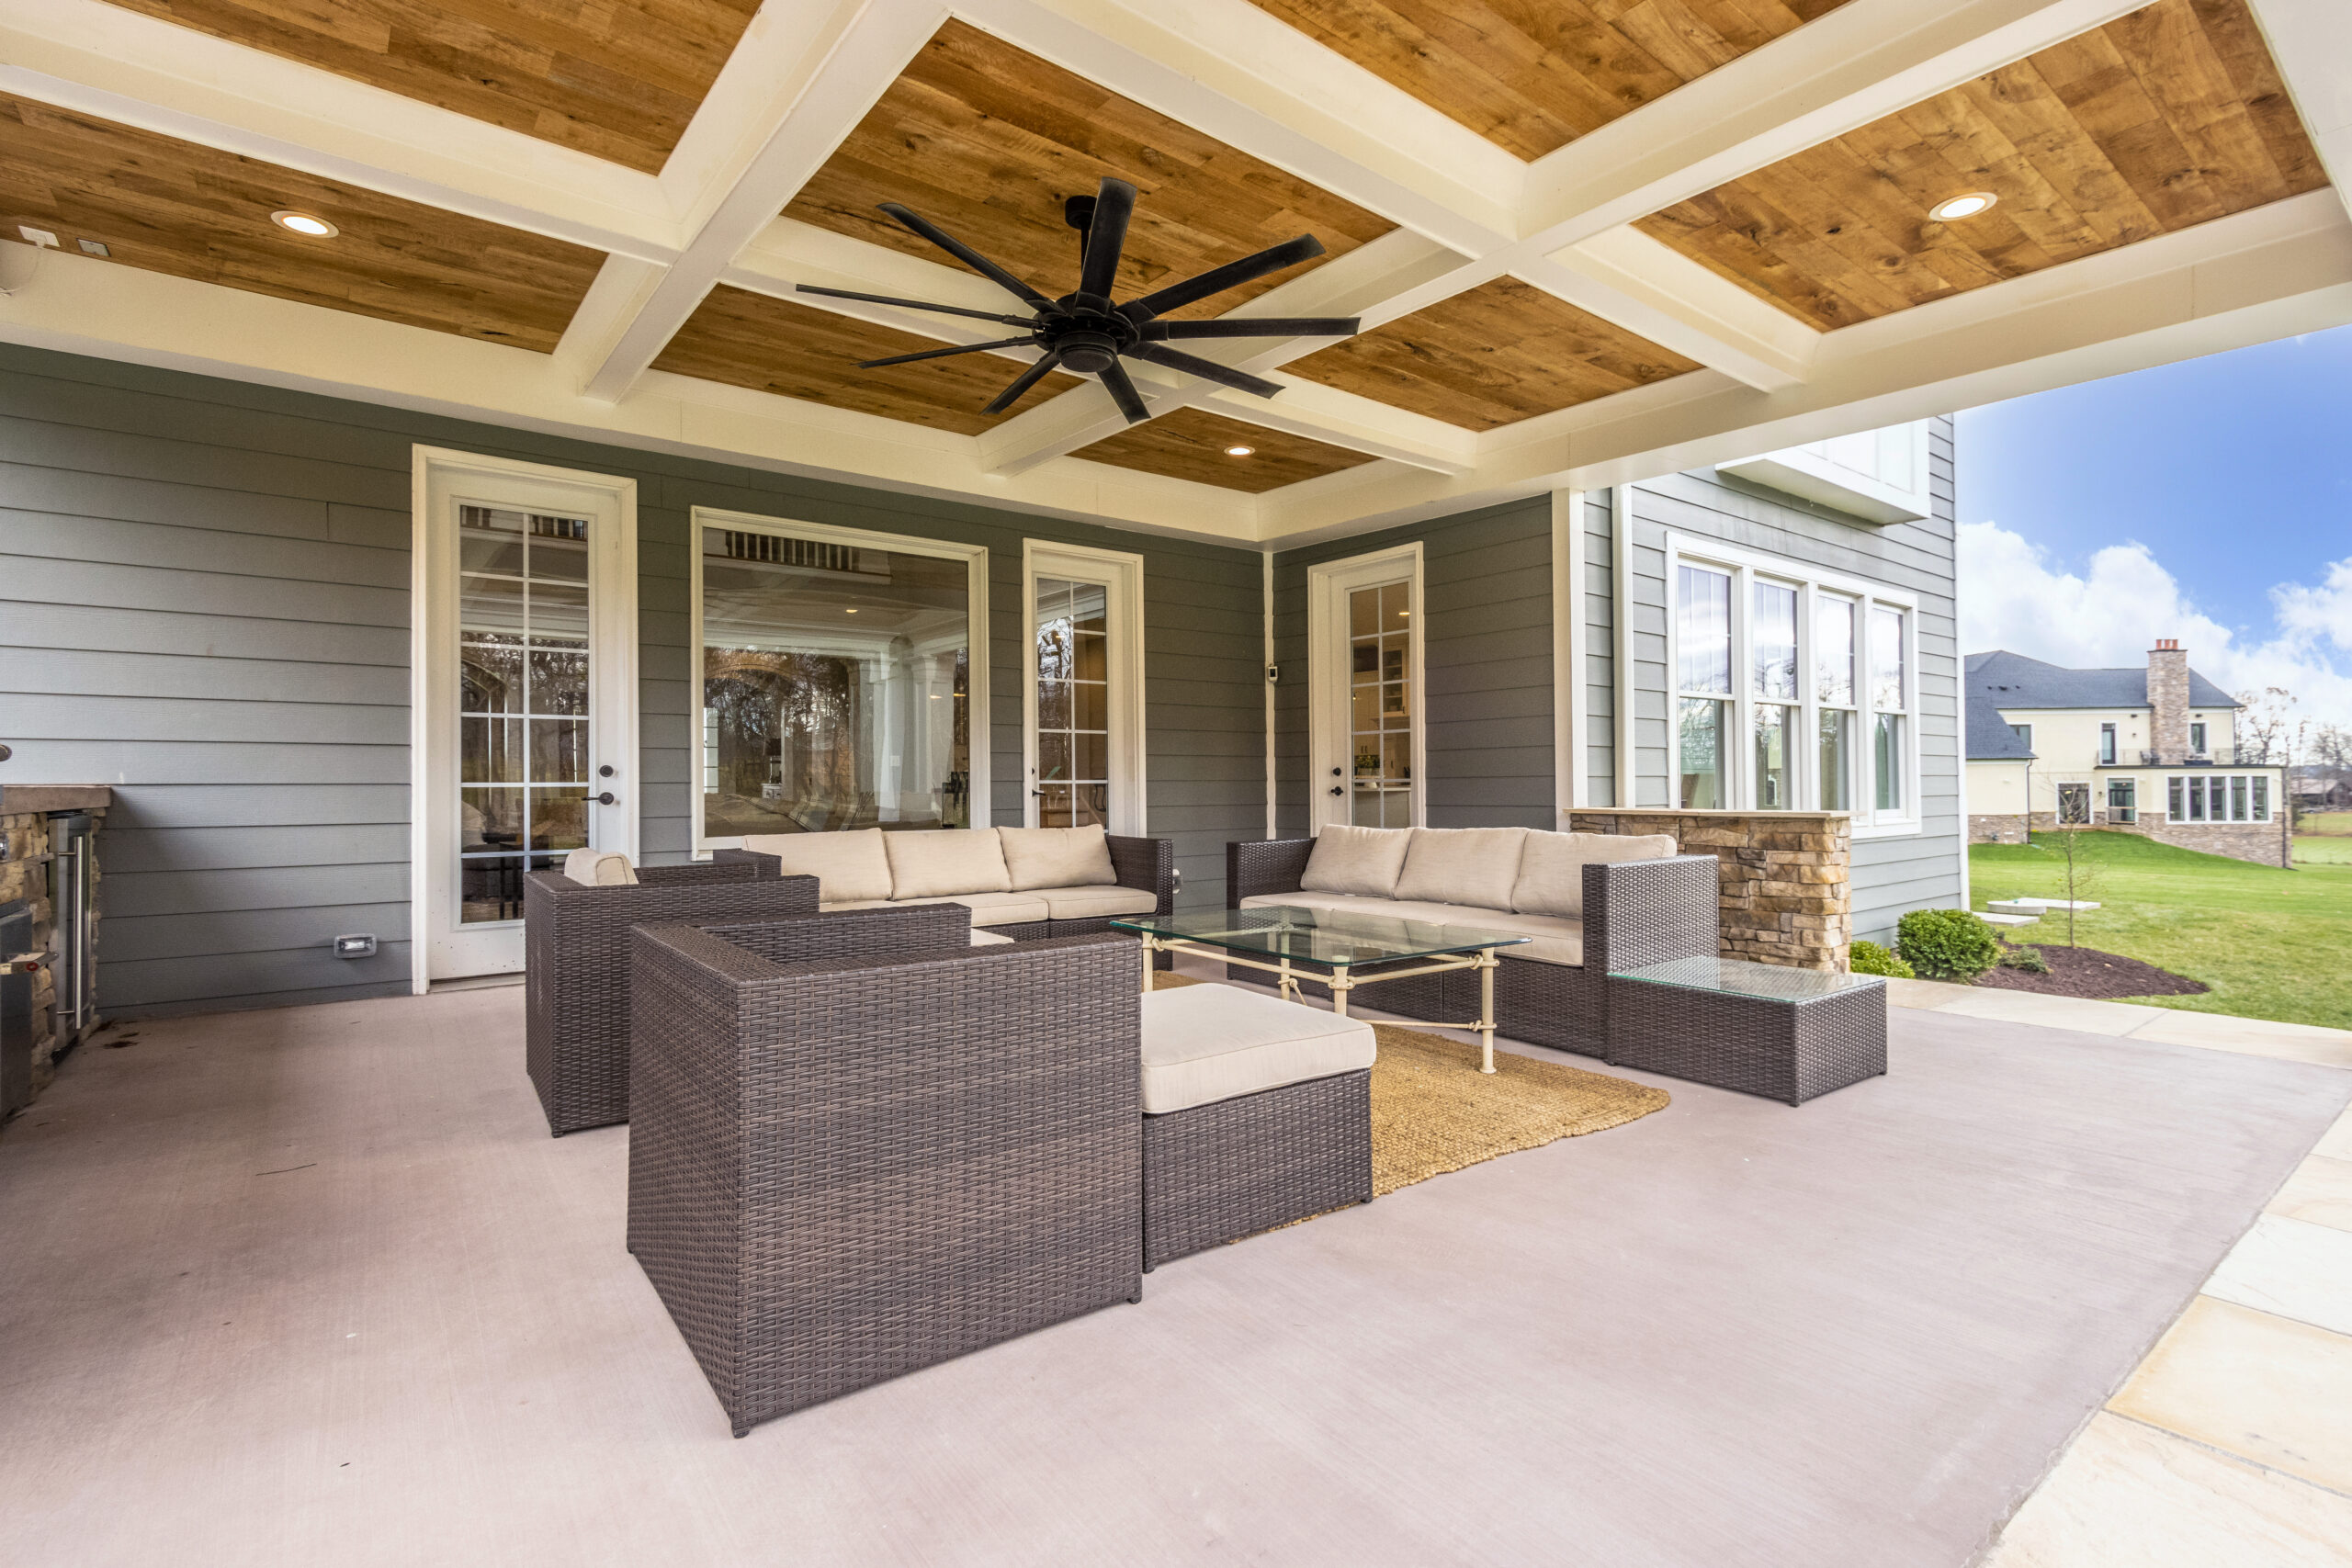 terrace with white and natural wood ceiling with a ceiling fan and grey-brown furniture